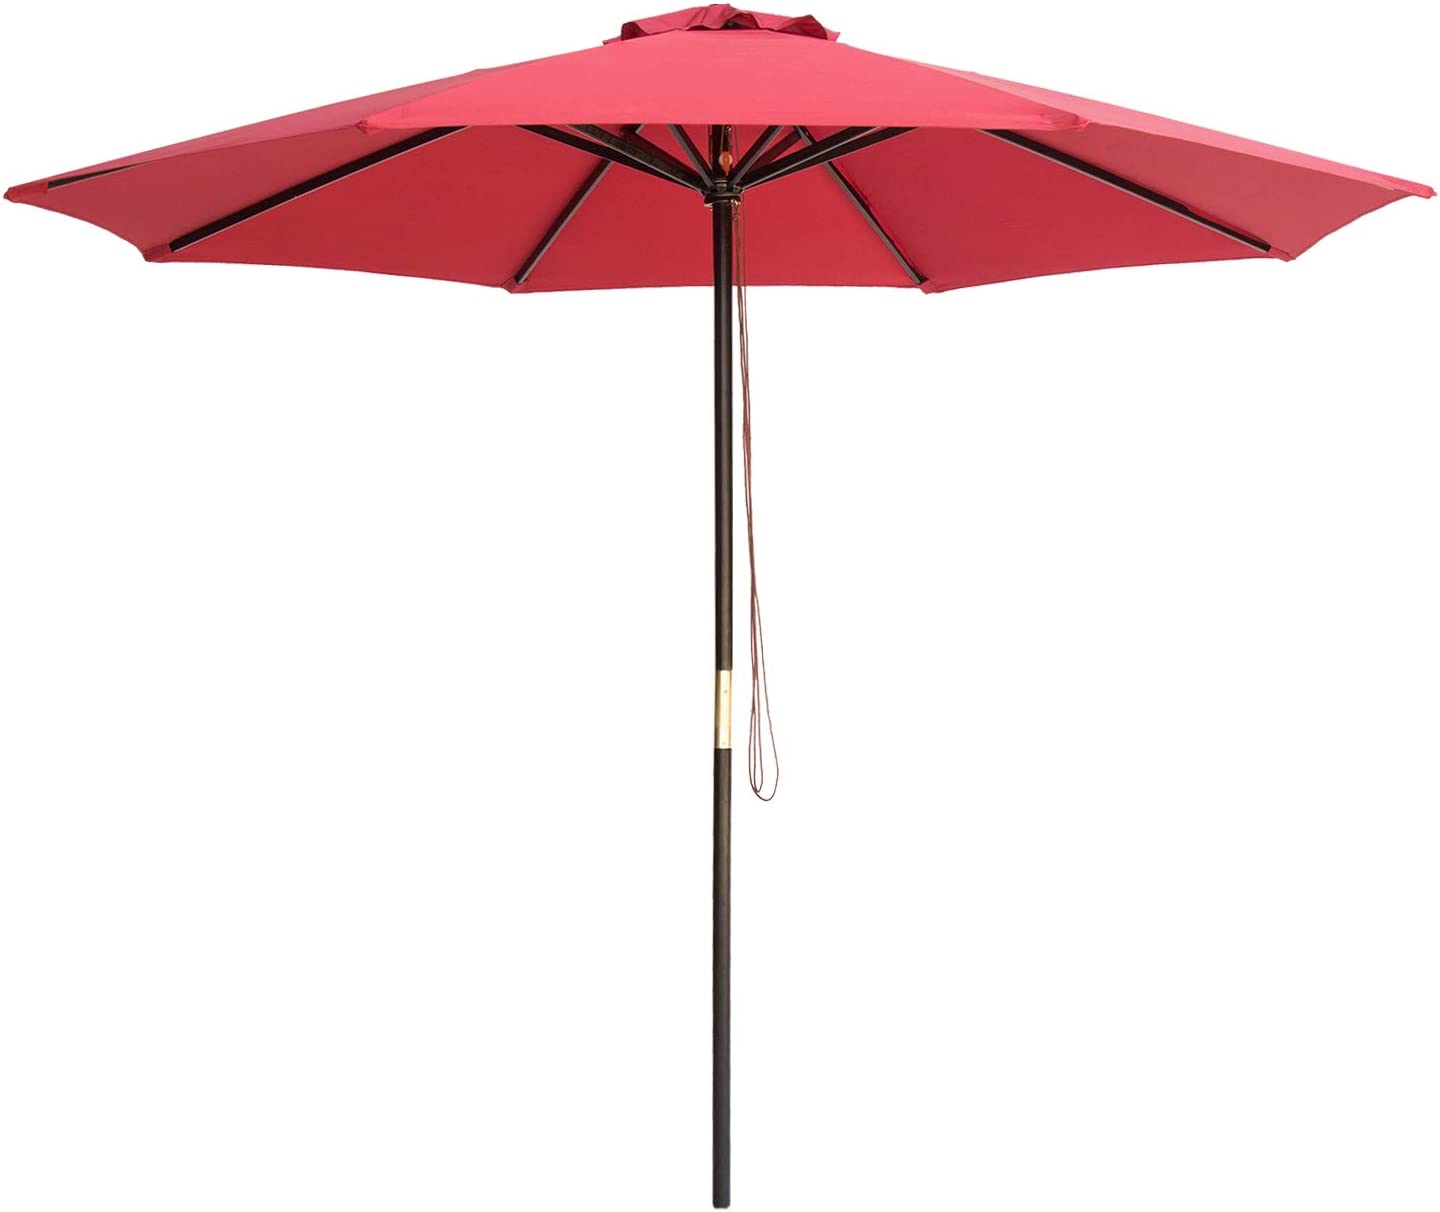 Bamboo Wood Outdoor Patio/Table/Market Umbrella with Pulley Lift – Red